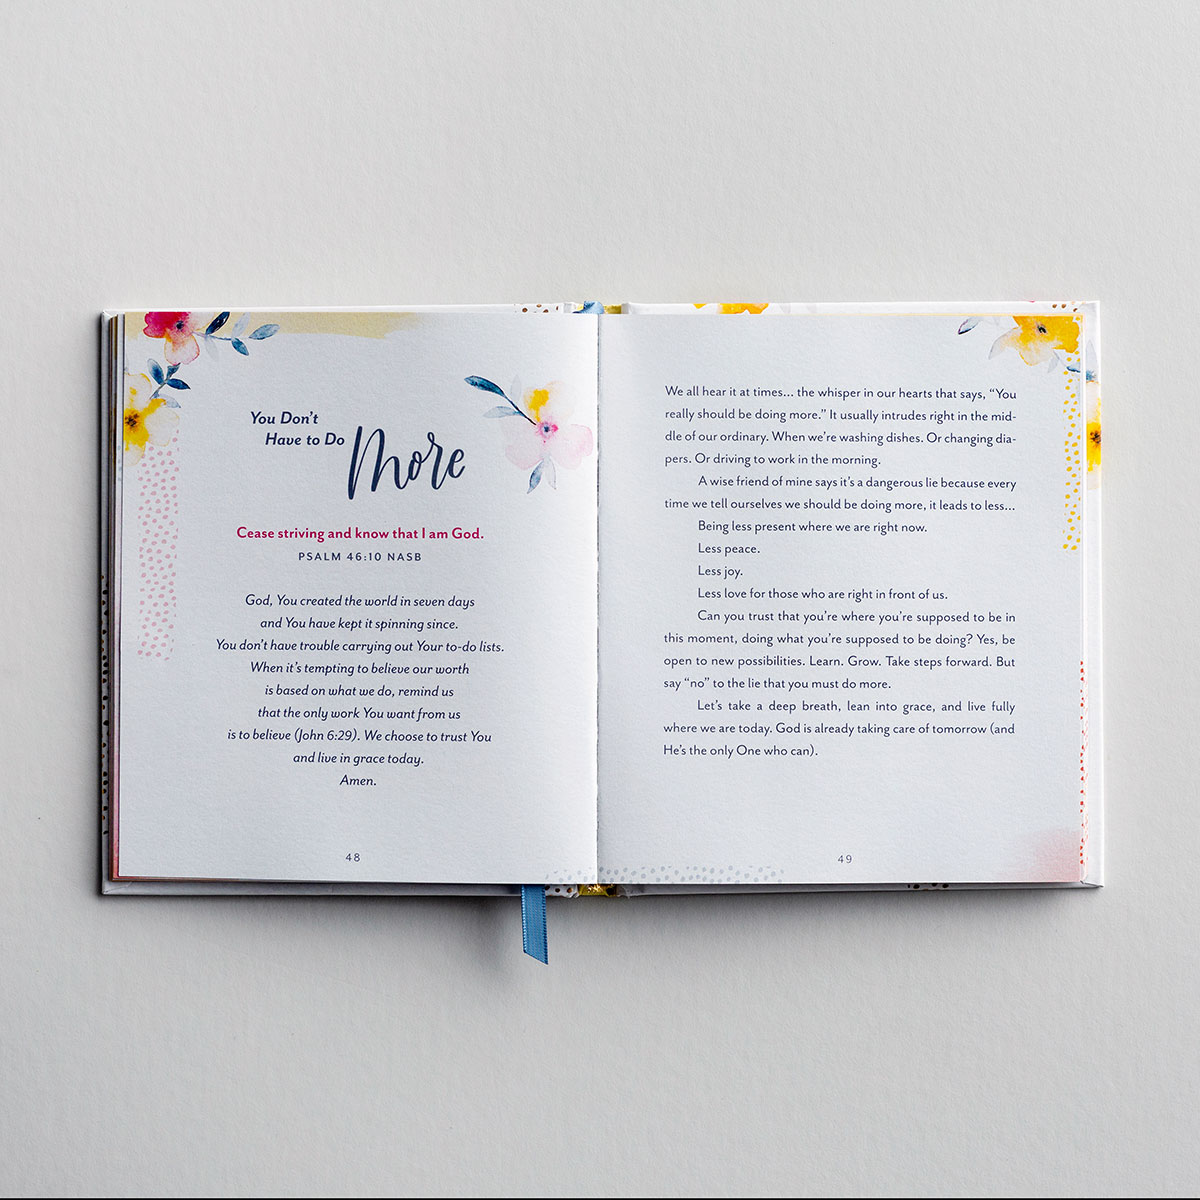 Holley Gerth's What's True About You: Life-Changing Reminders of Who God Says You Are is a reminder that God says we're deeply loved, wonderfully made, and He has good plans for us. Every page gives new hope, greater confidence